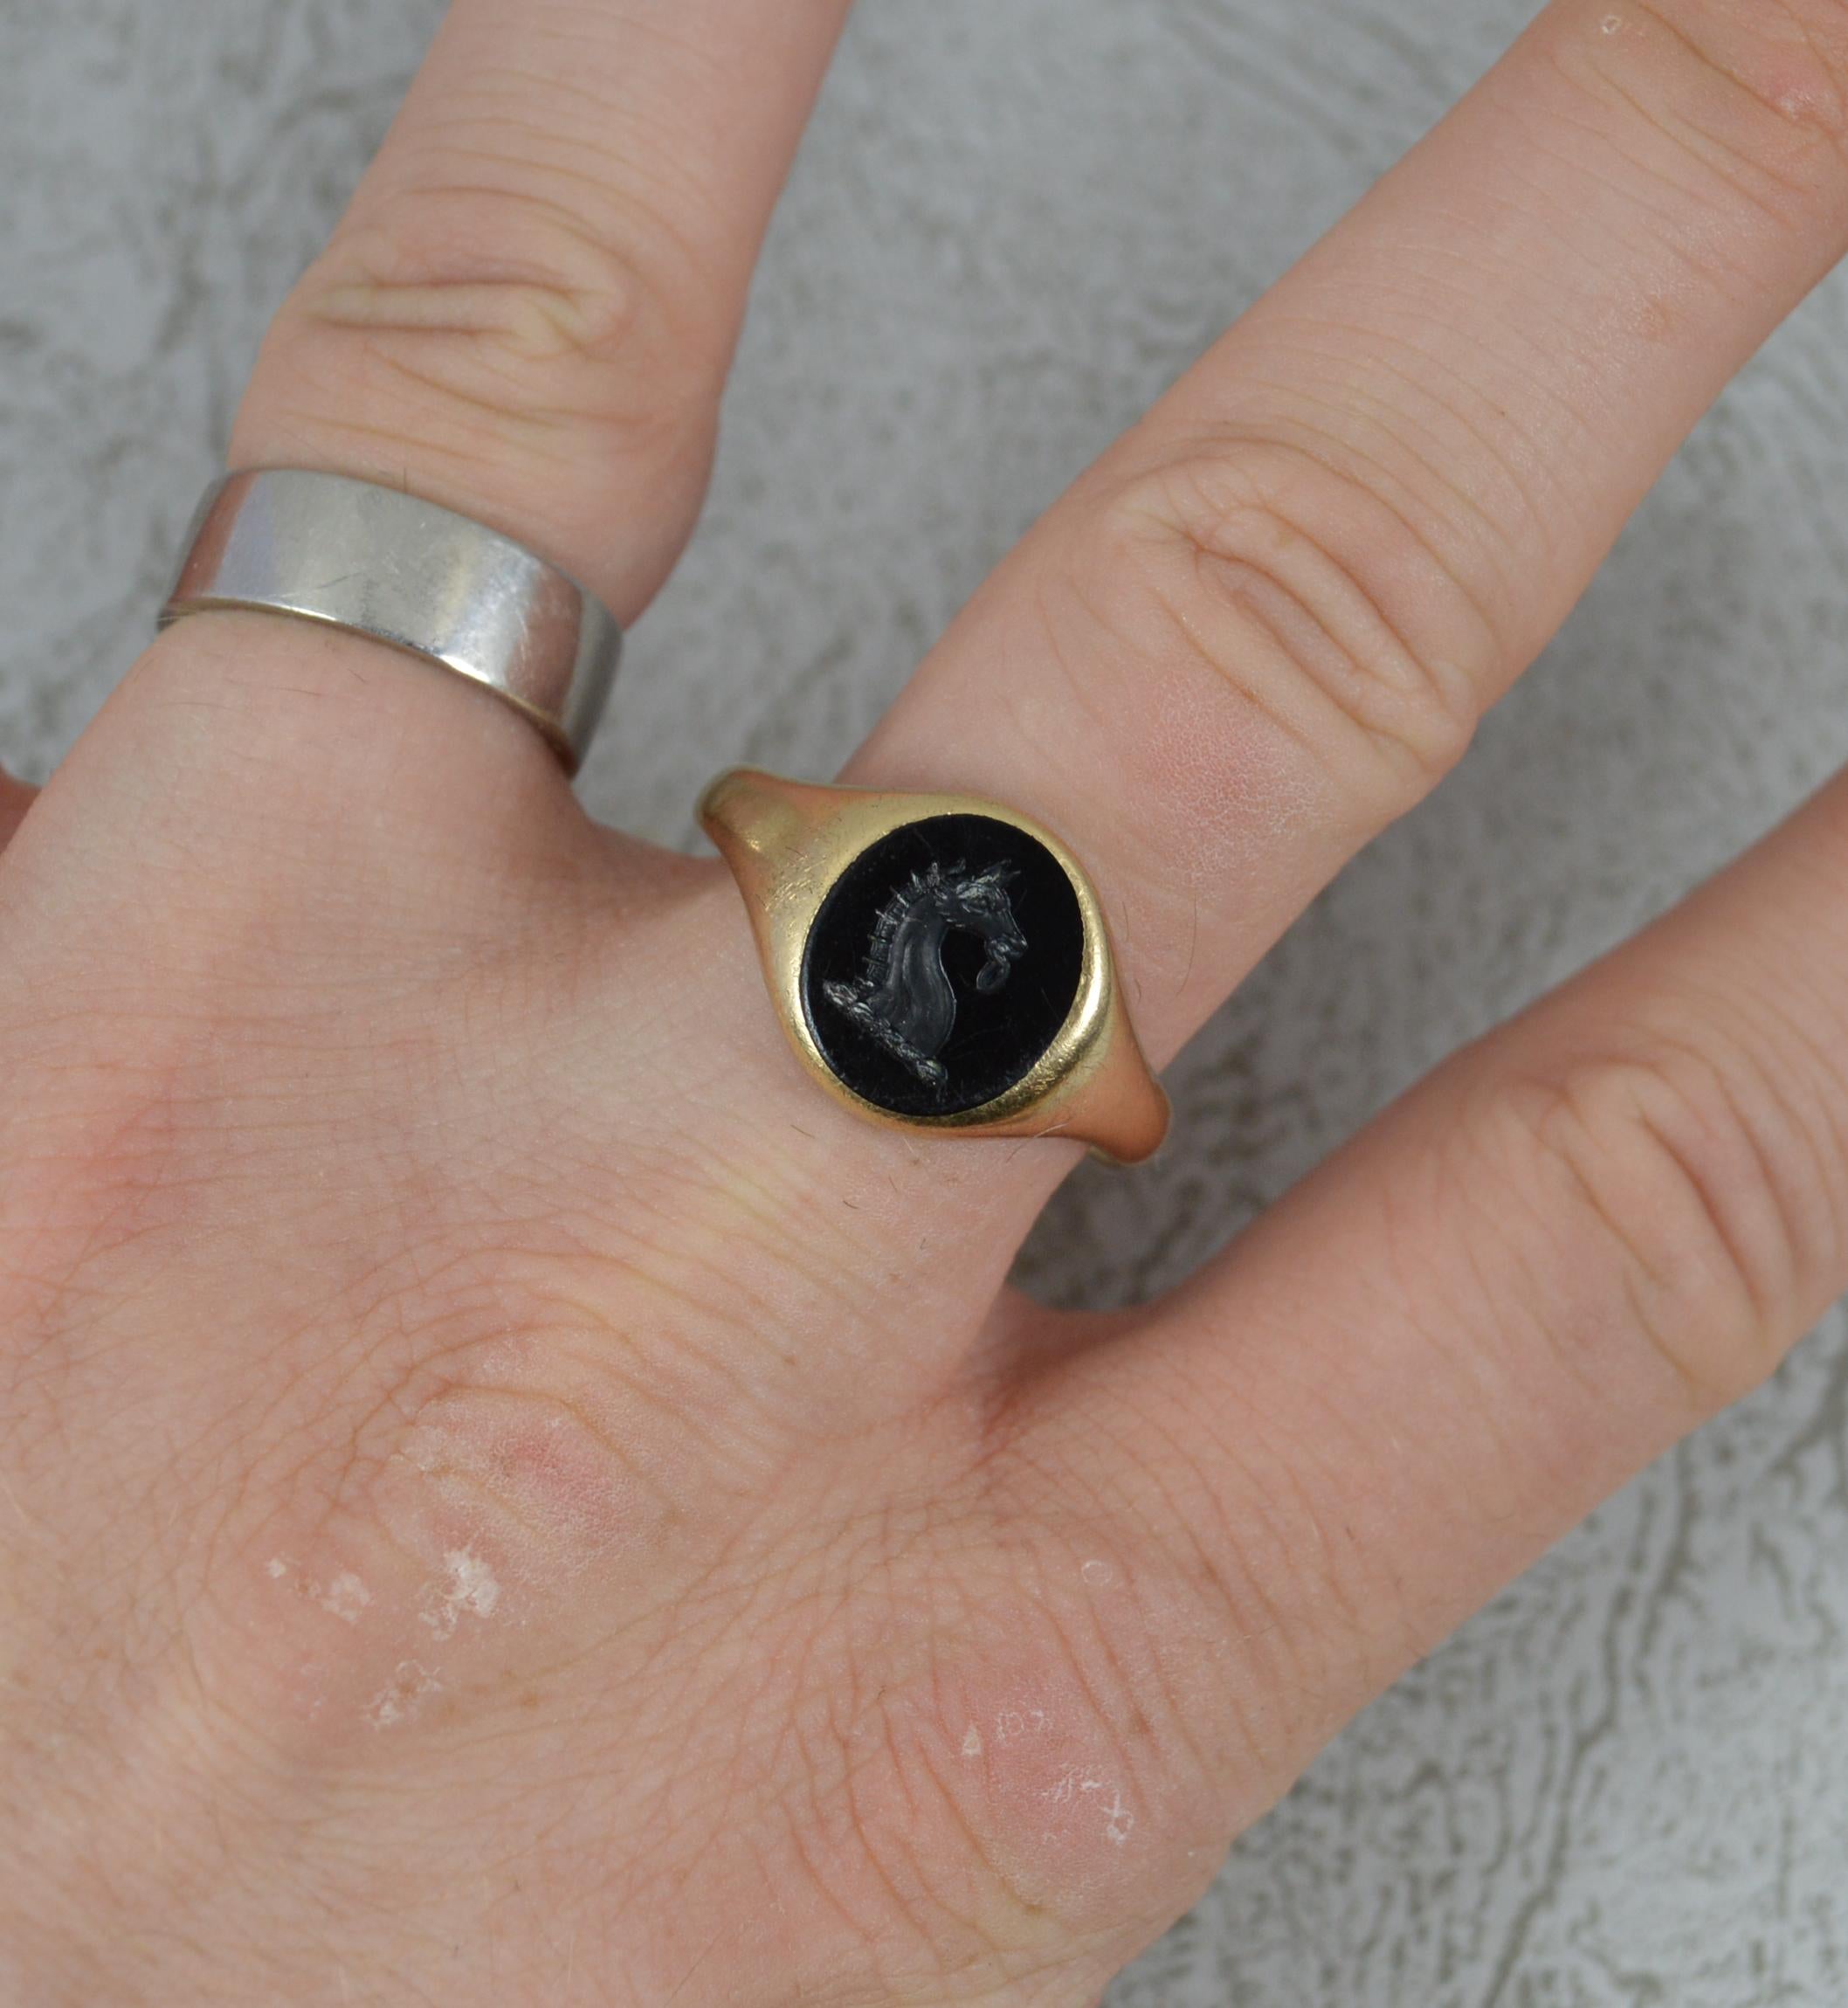 A superb vintage signet ring.
Solid 9 carat yellow gold example.
Designed with an oval shaped onyx to centre. 10mm x 12mm approx. 
Hand carved or engraved to feature a horse head.

CONDITION ; Very good. Clean band. Solid example. Well set stone,